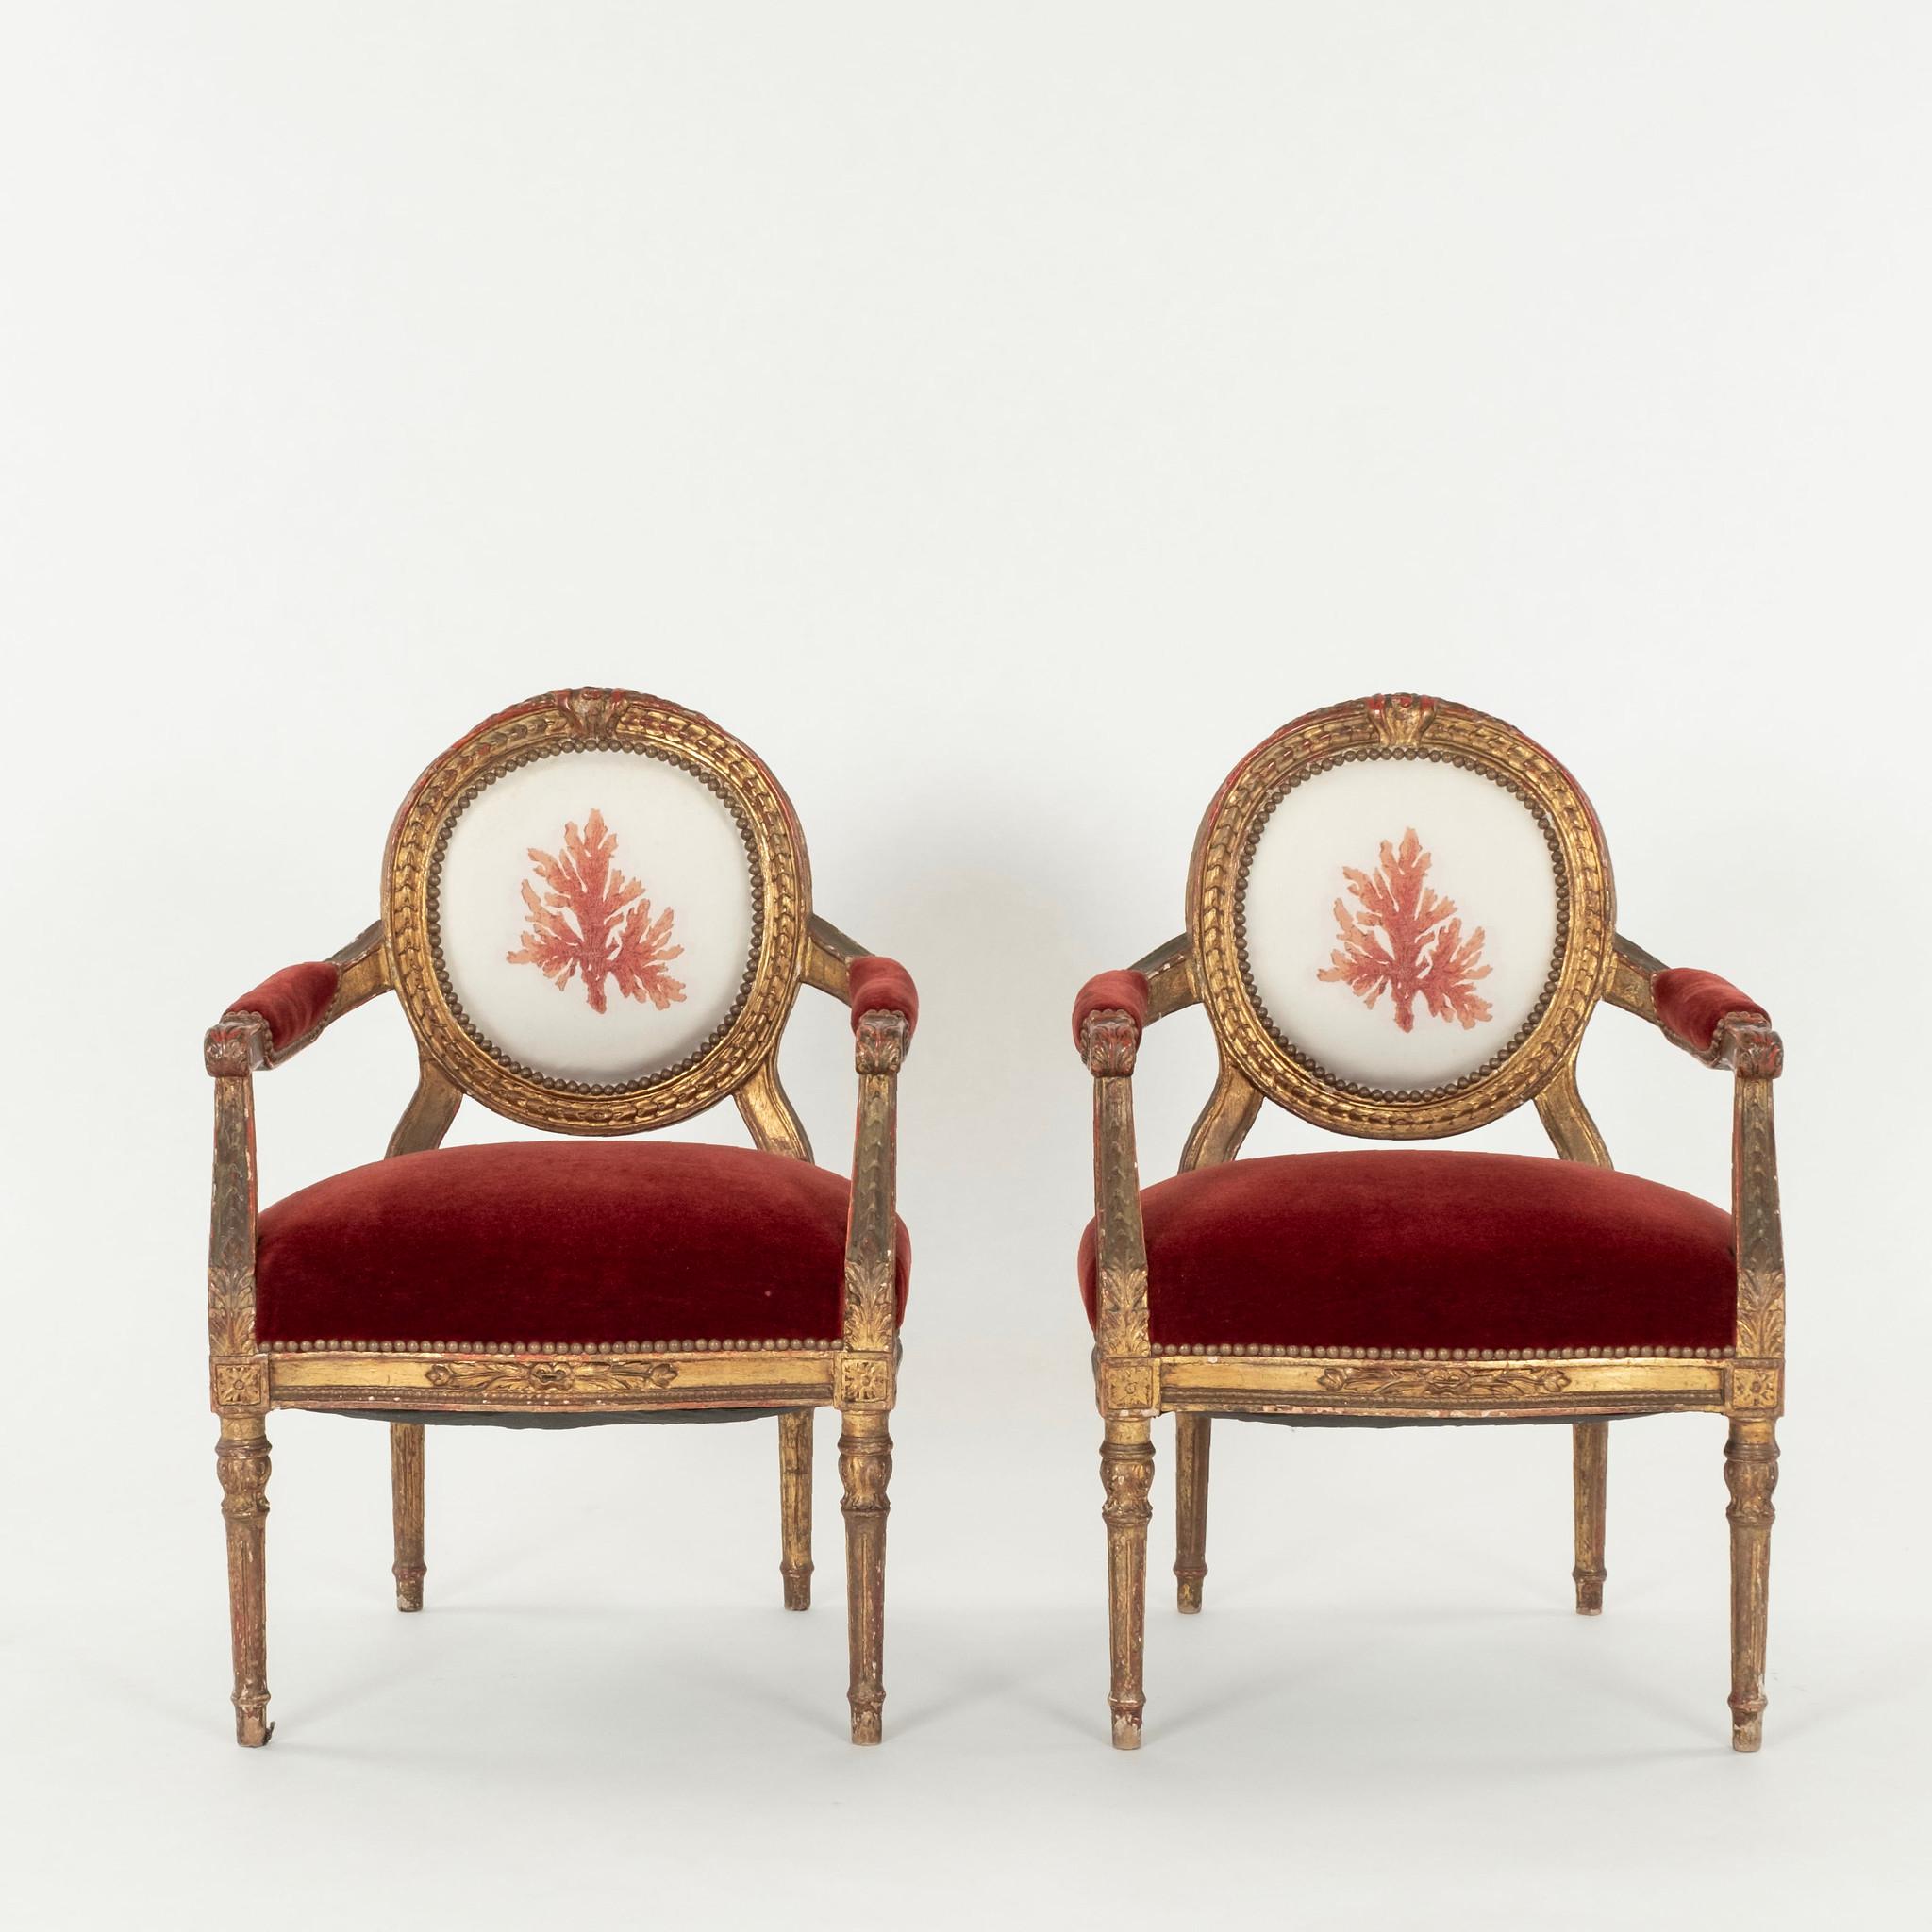 Pair of 19th Century or earlier Louis XVI Style fauteuils upholstered with coral motif inside backs, red mohair seats and on outside backs.